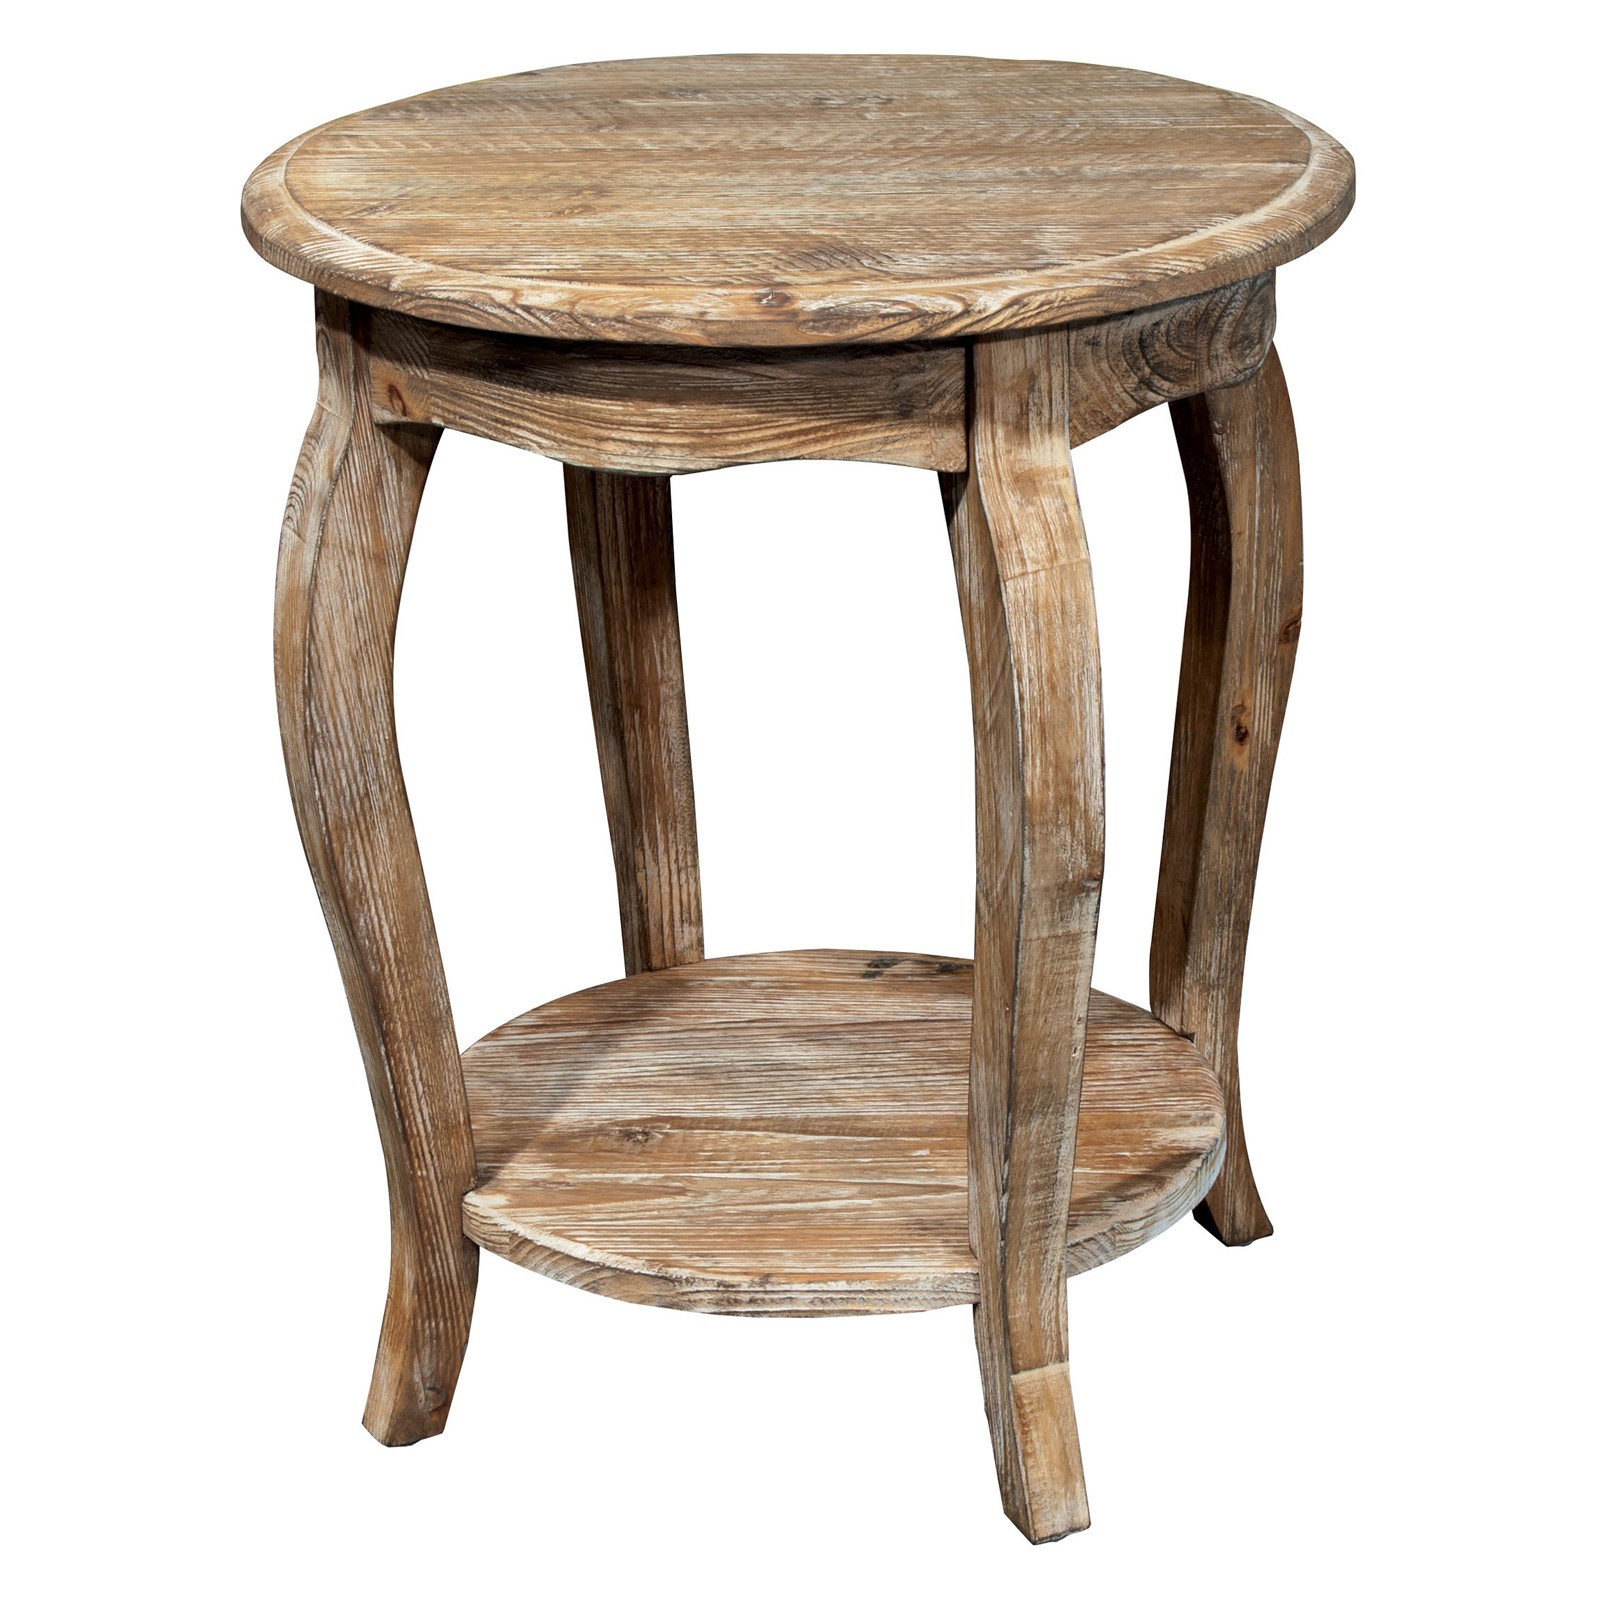 Alaterre rustic reclaimed driftwood round end table end